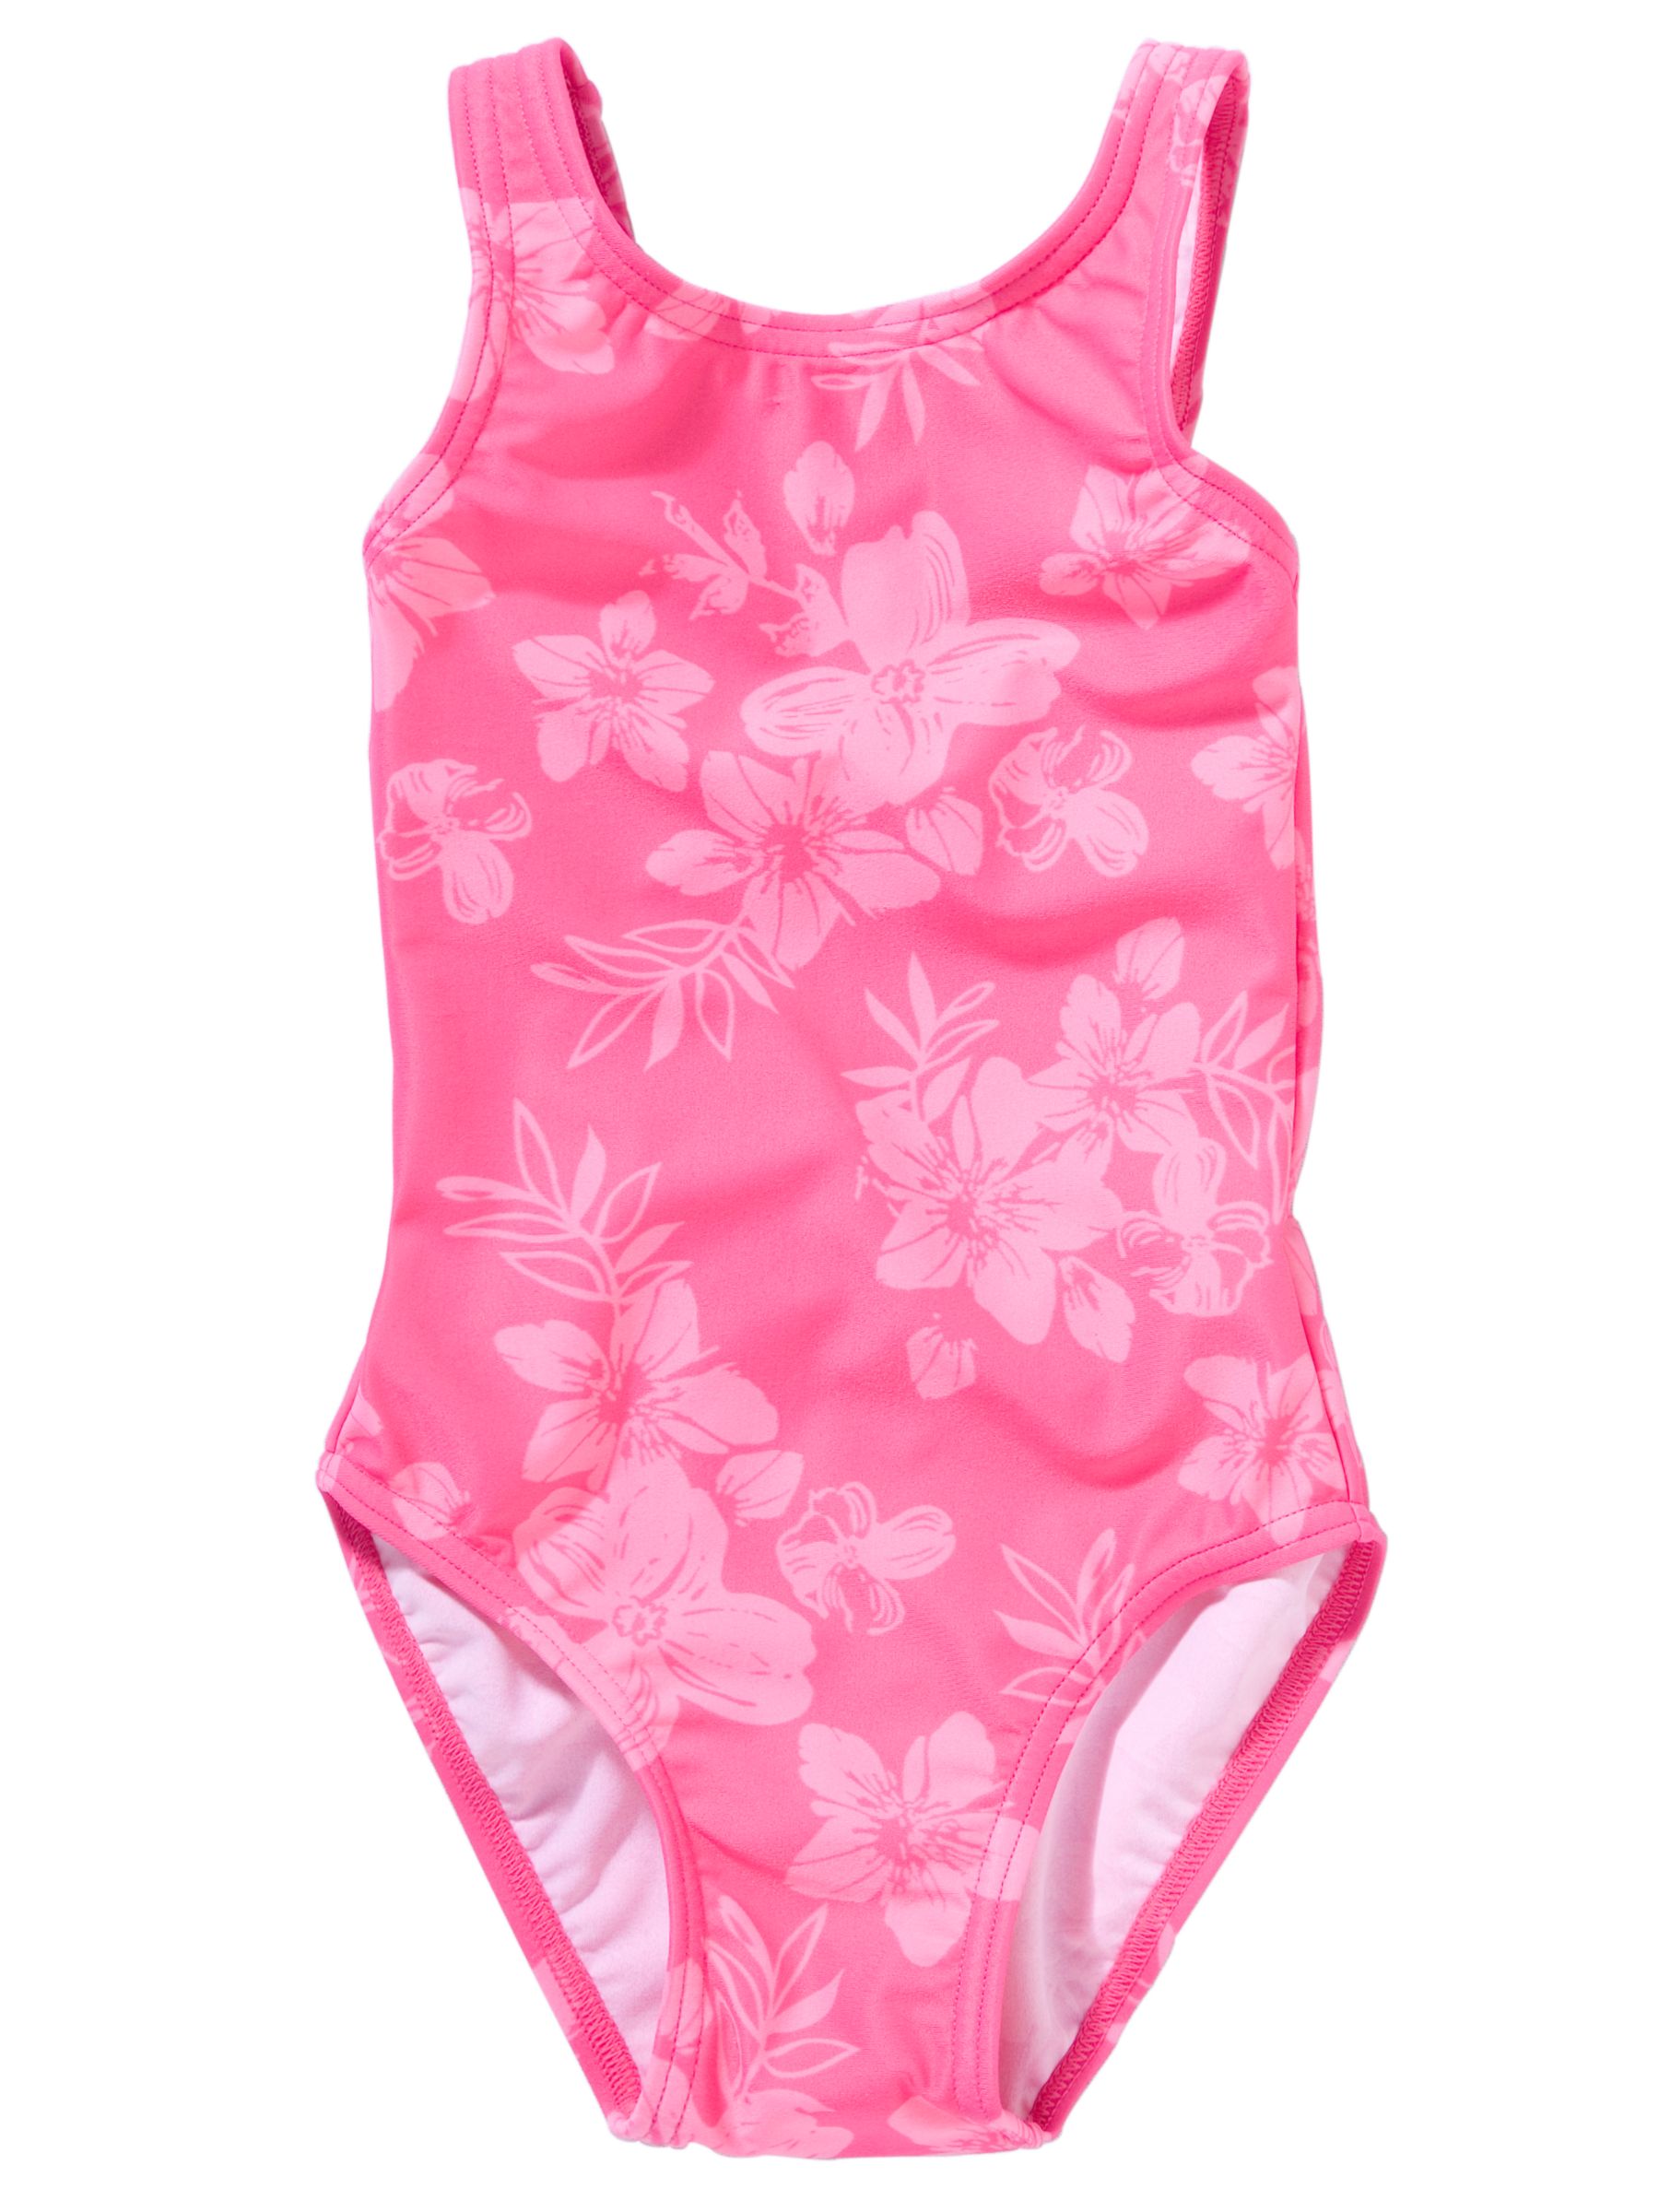 John Lewis Girl Floral Print One-Piece Swimsuit,